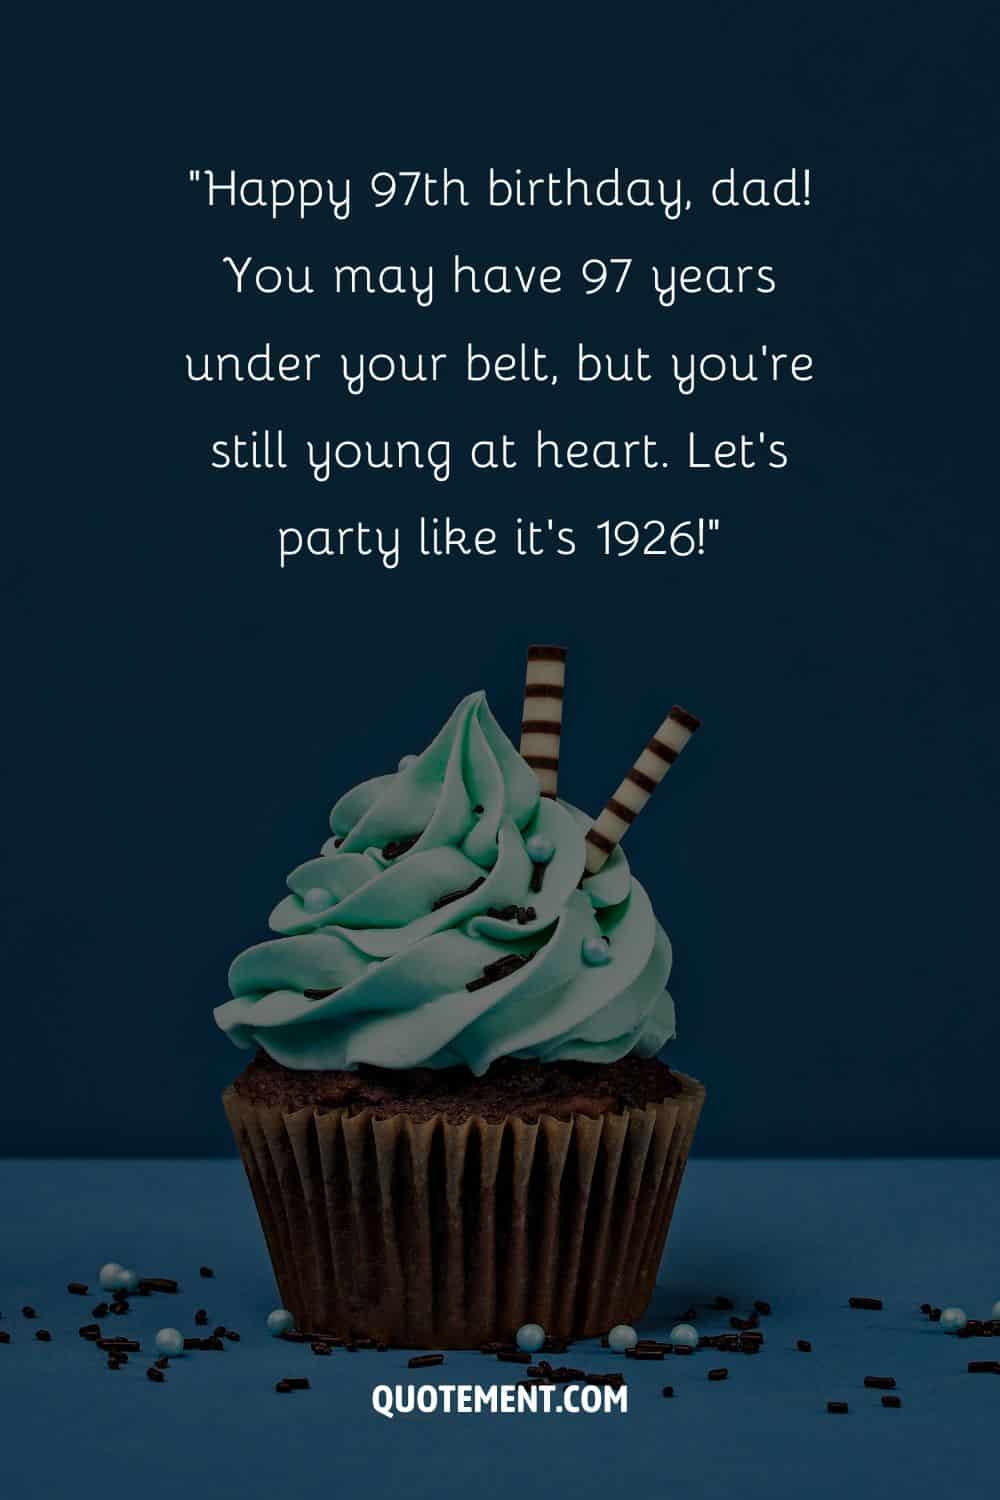 Humorous message for a dad's 97th birthday and a cupcake in the background, too
